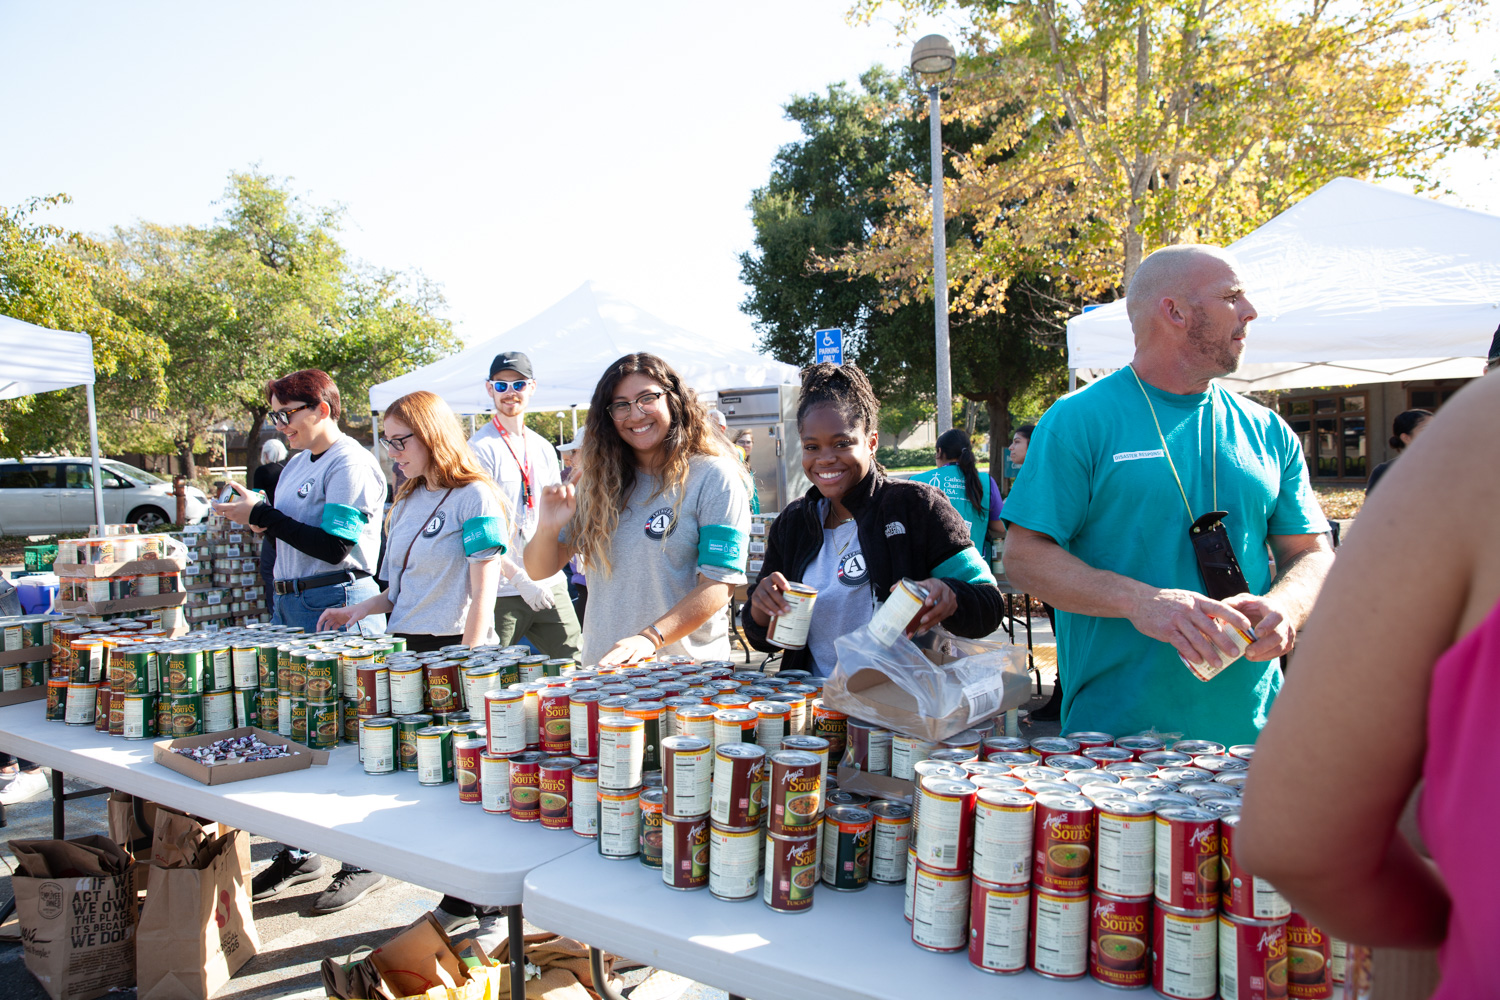 Volunteers at a food drive after the Kincade Fire in Sonoma County